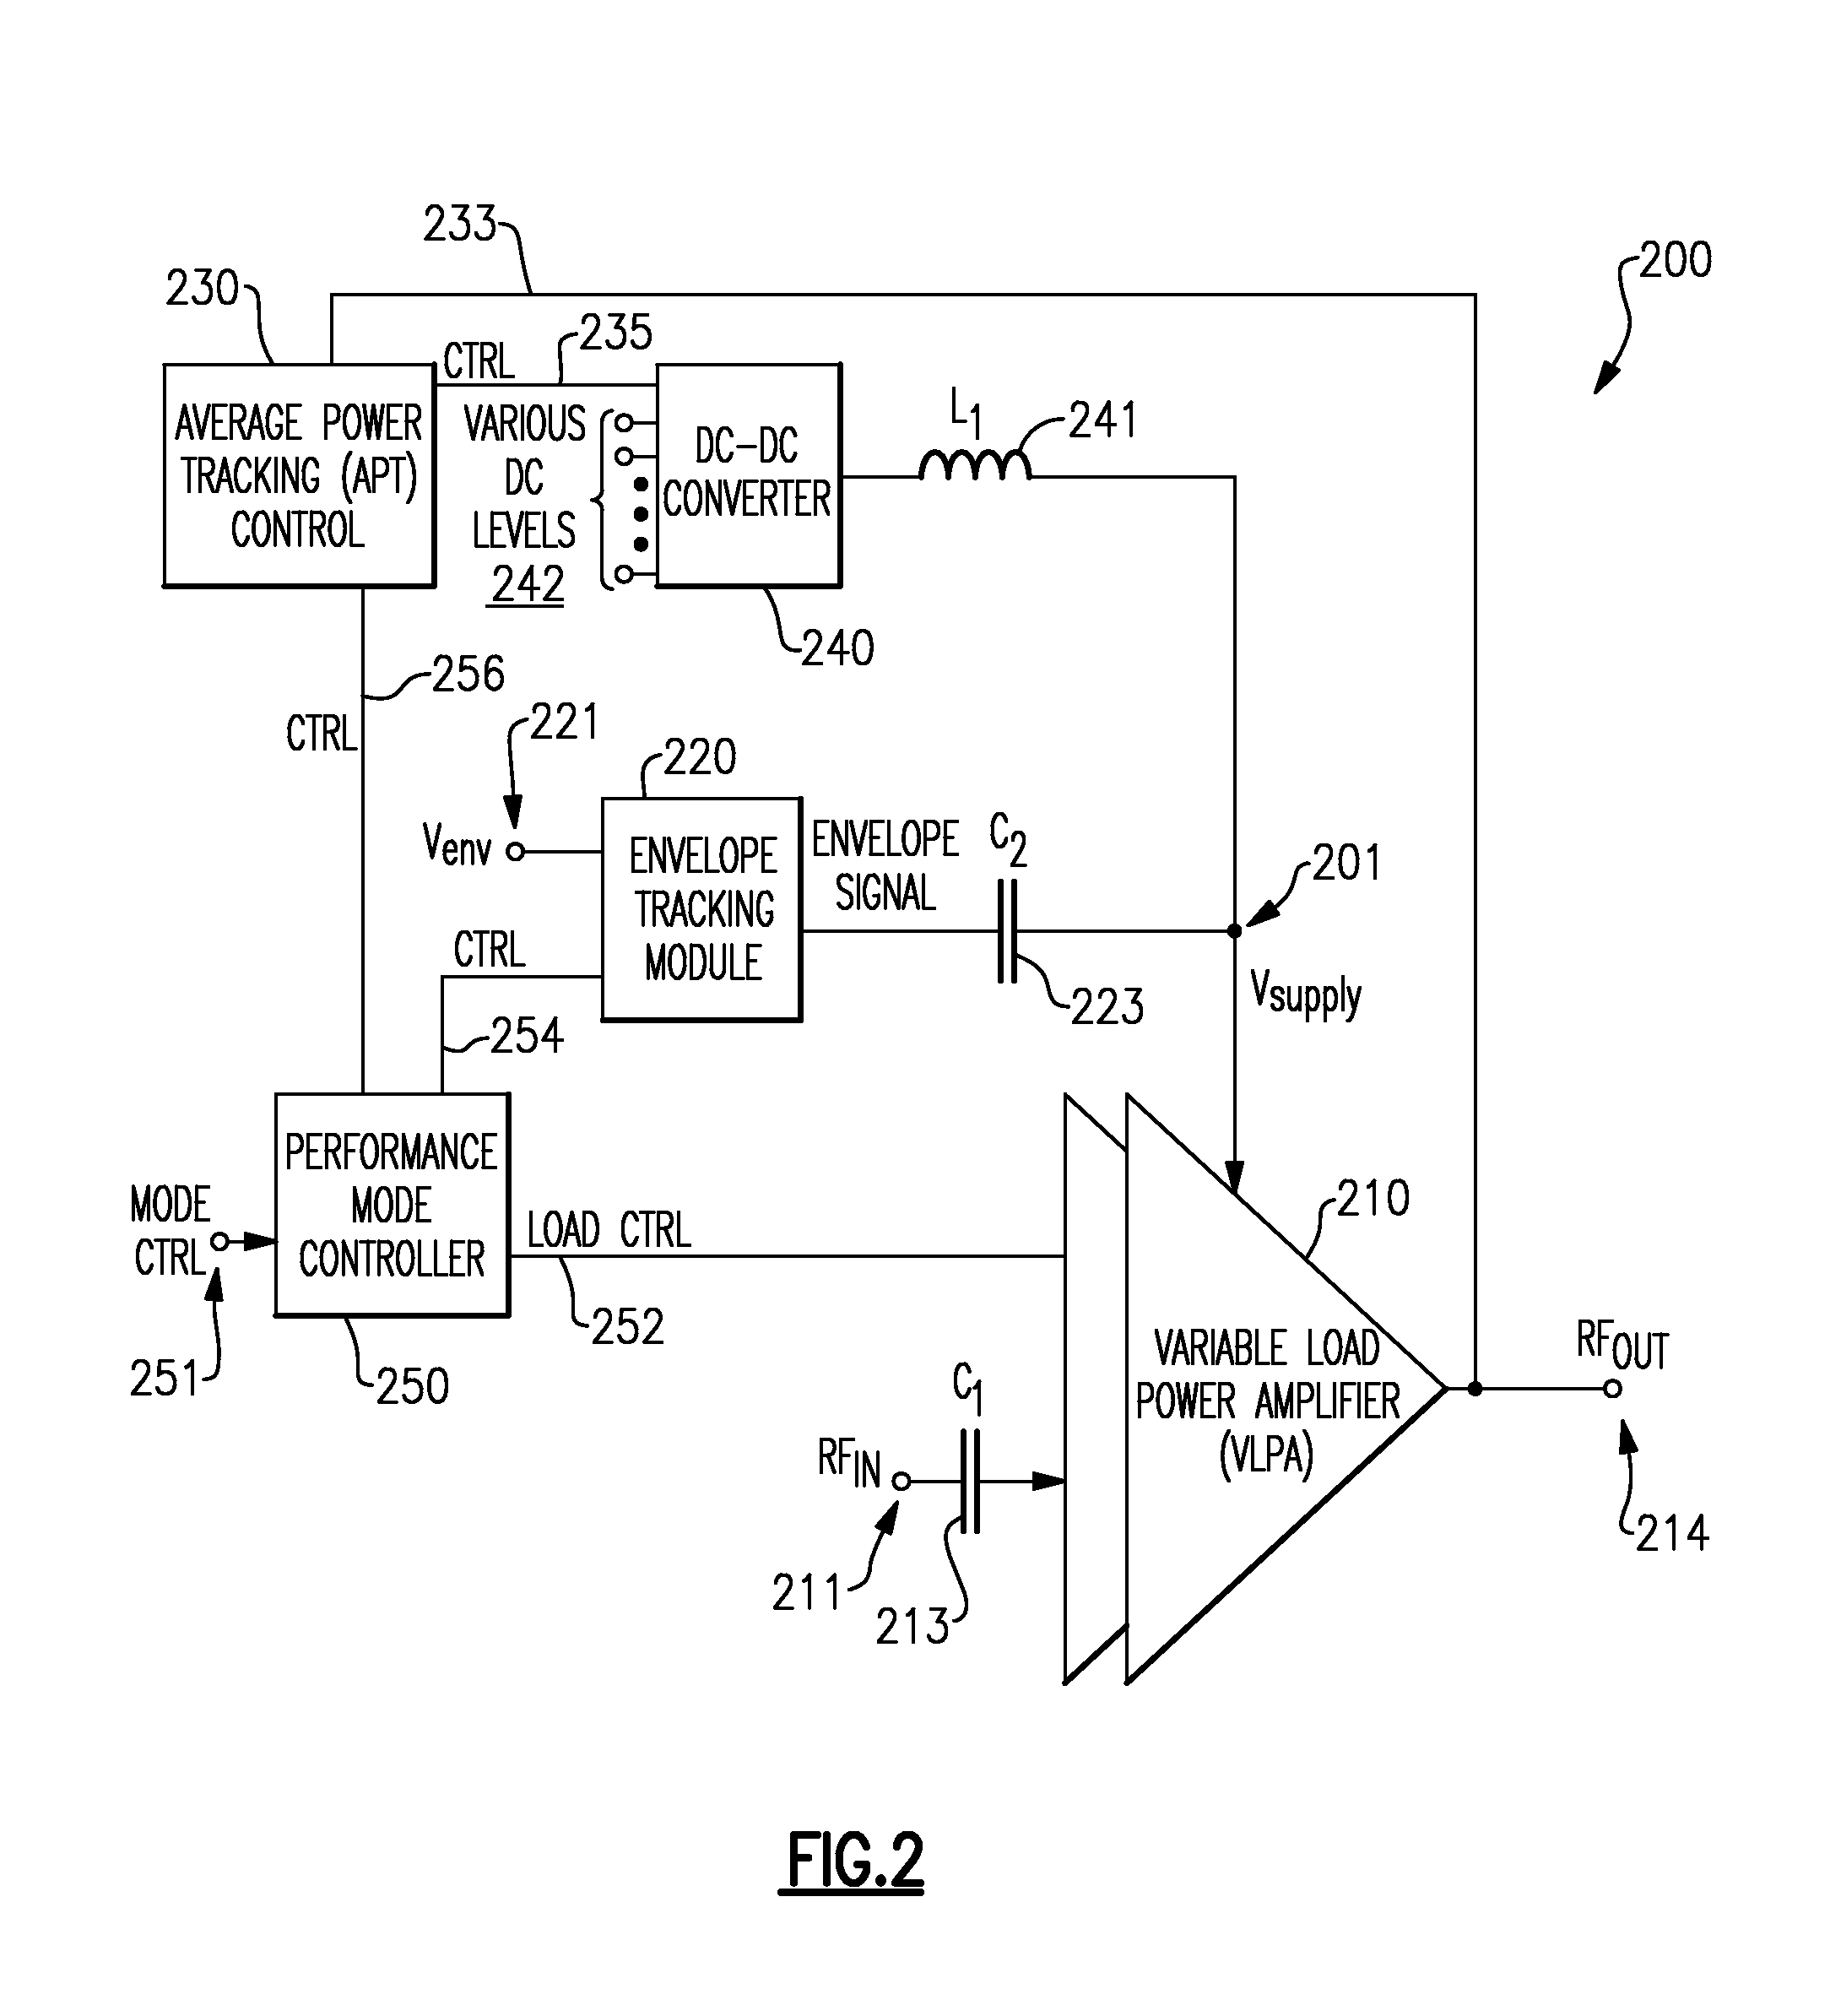 Variable load power amplifier supporting dual-mode envelope tracking and average power tracking performance